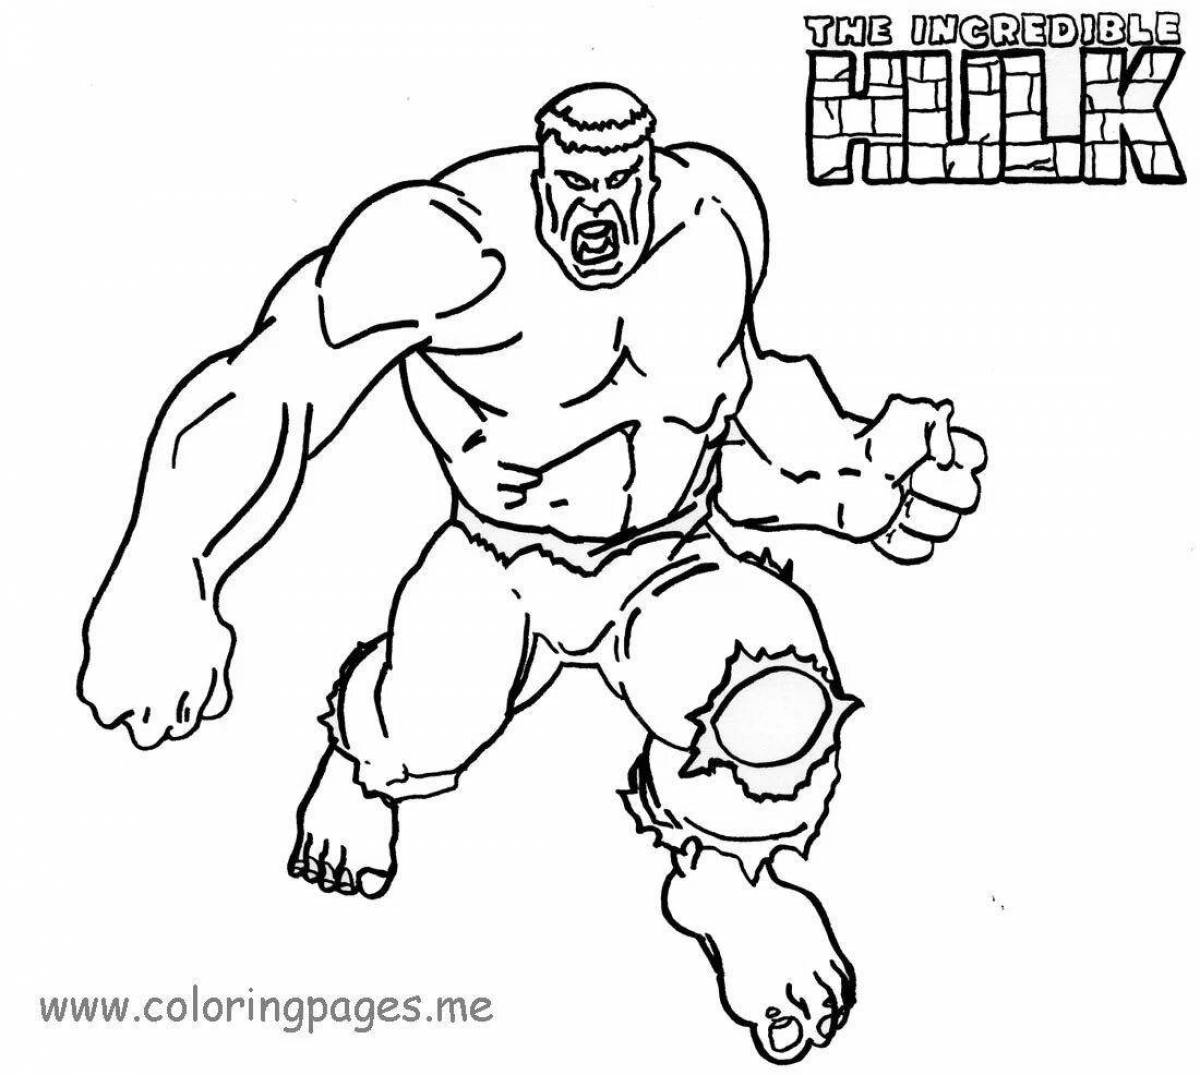 Great iron man and the hulk coloring book